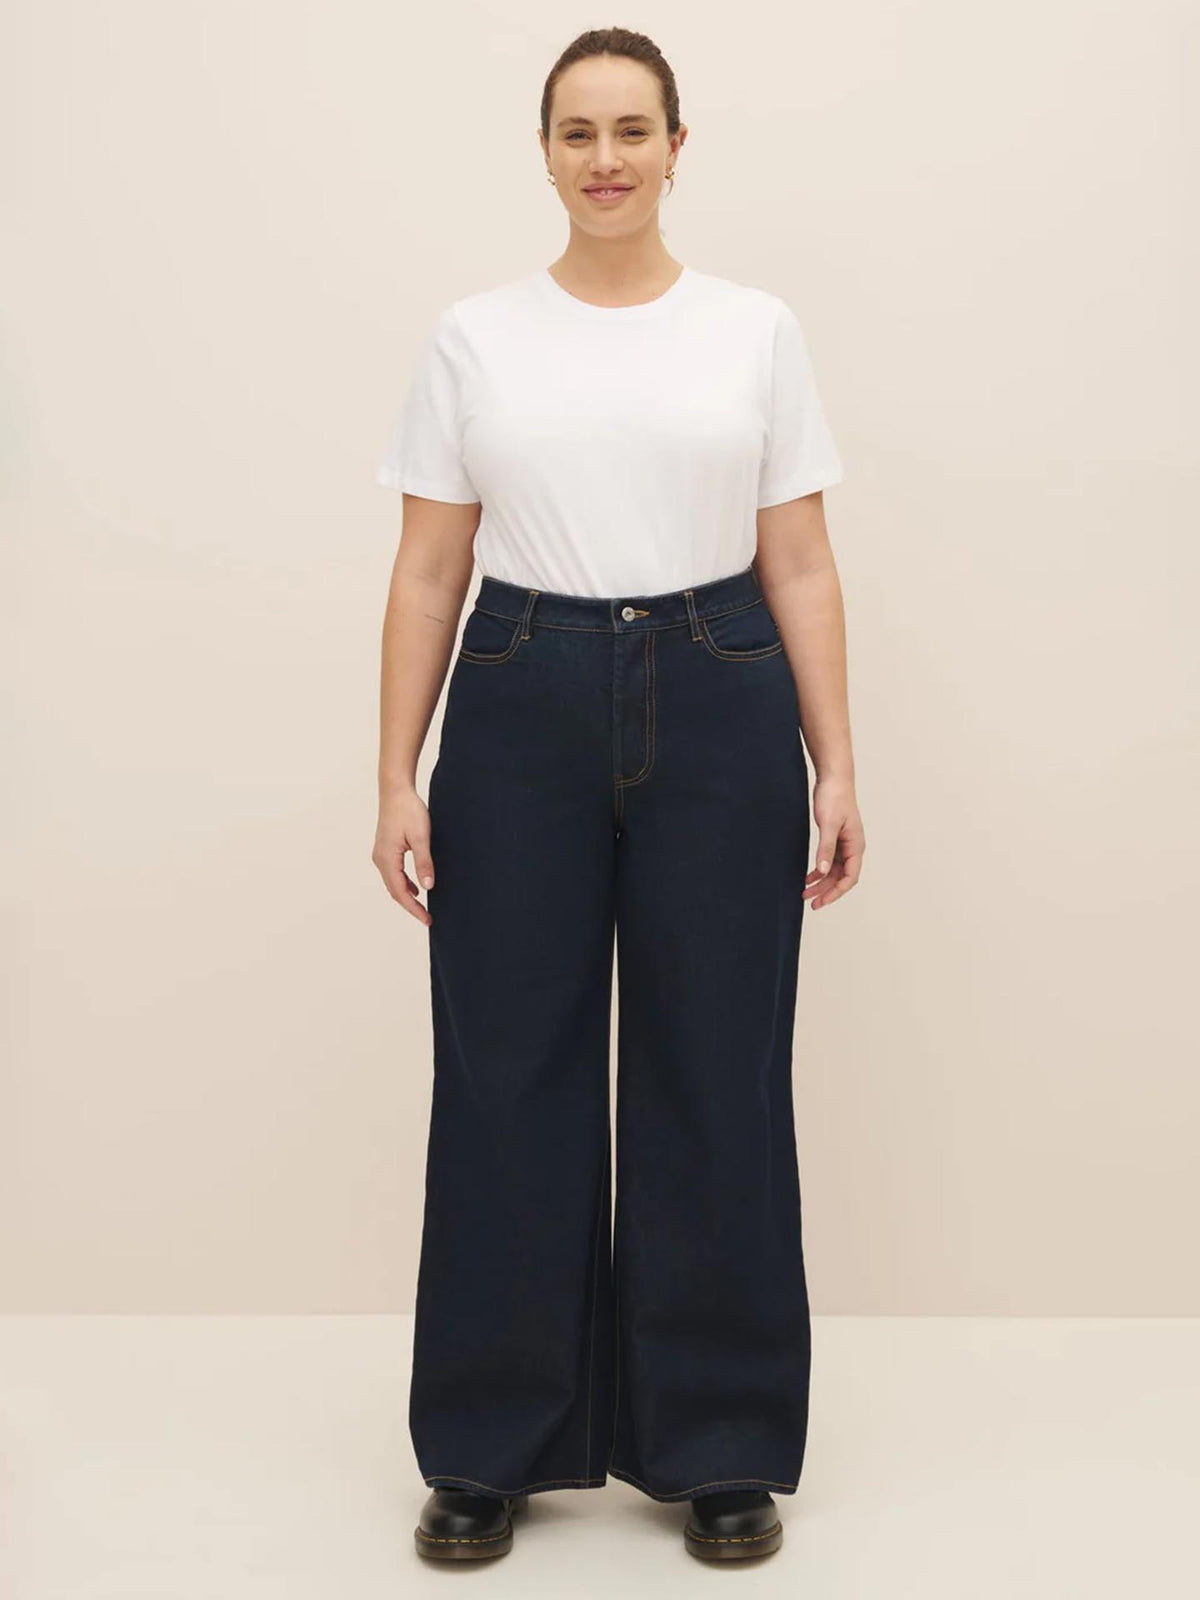 Woman standing in a neutral pose wearing a white t-shirt and Kowtow High Puddle Jeans – Indigo Denim against a soft beige background.